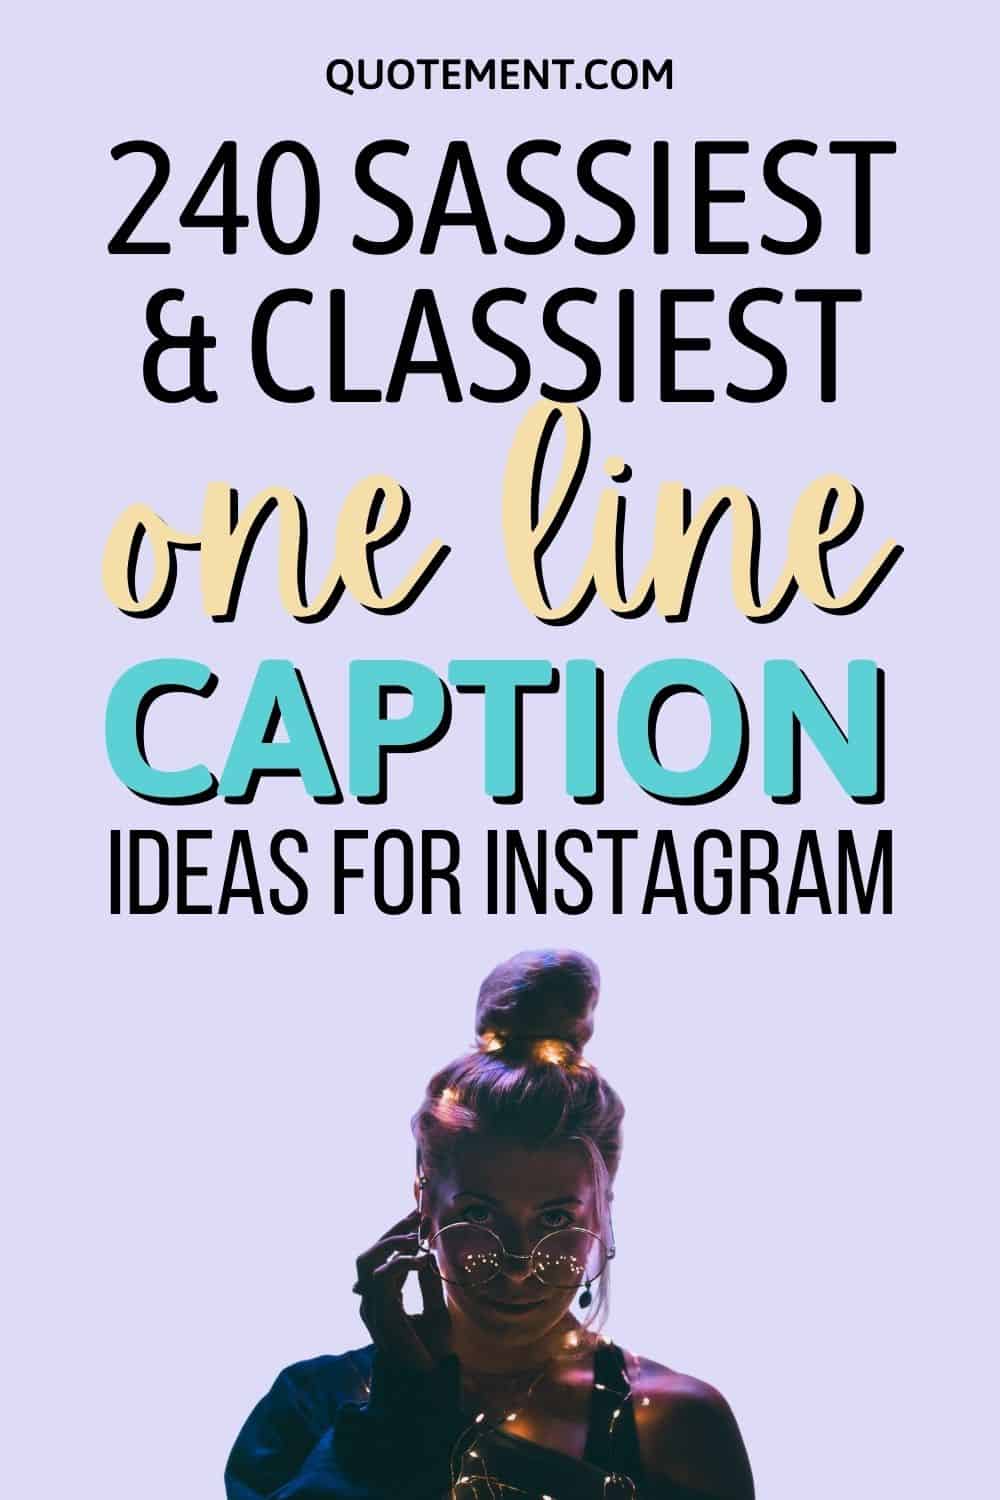 240 Sassiest & Classiest One Line Caption Ideas For Instagram